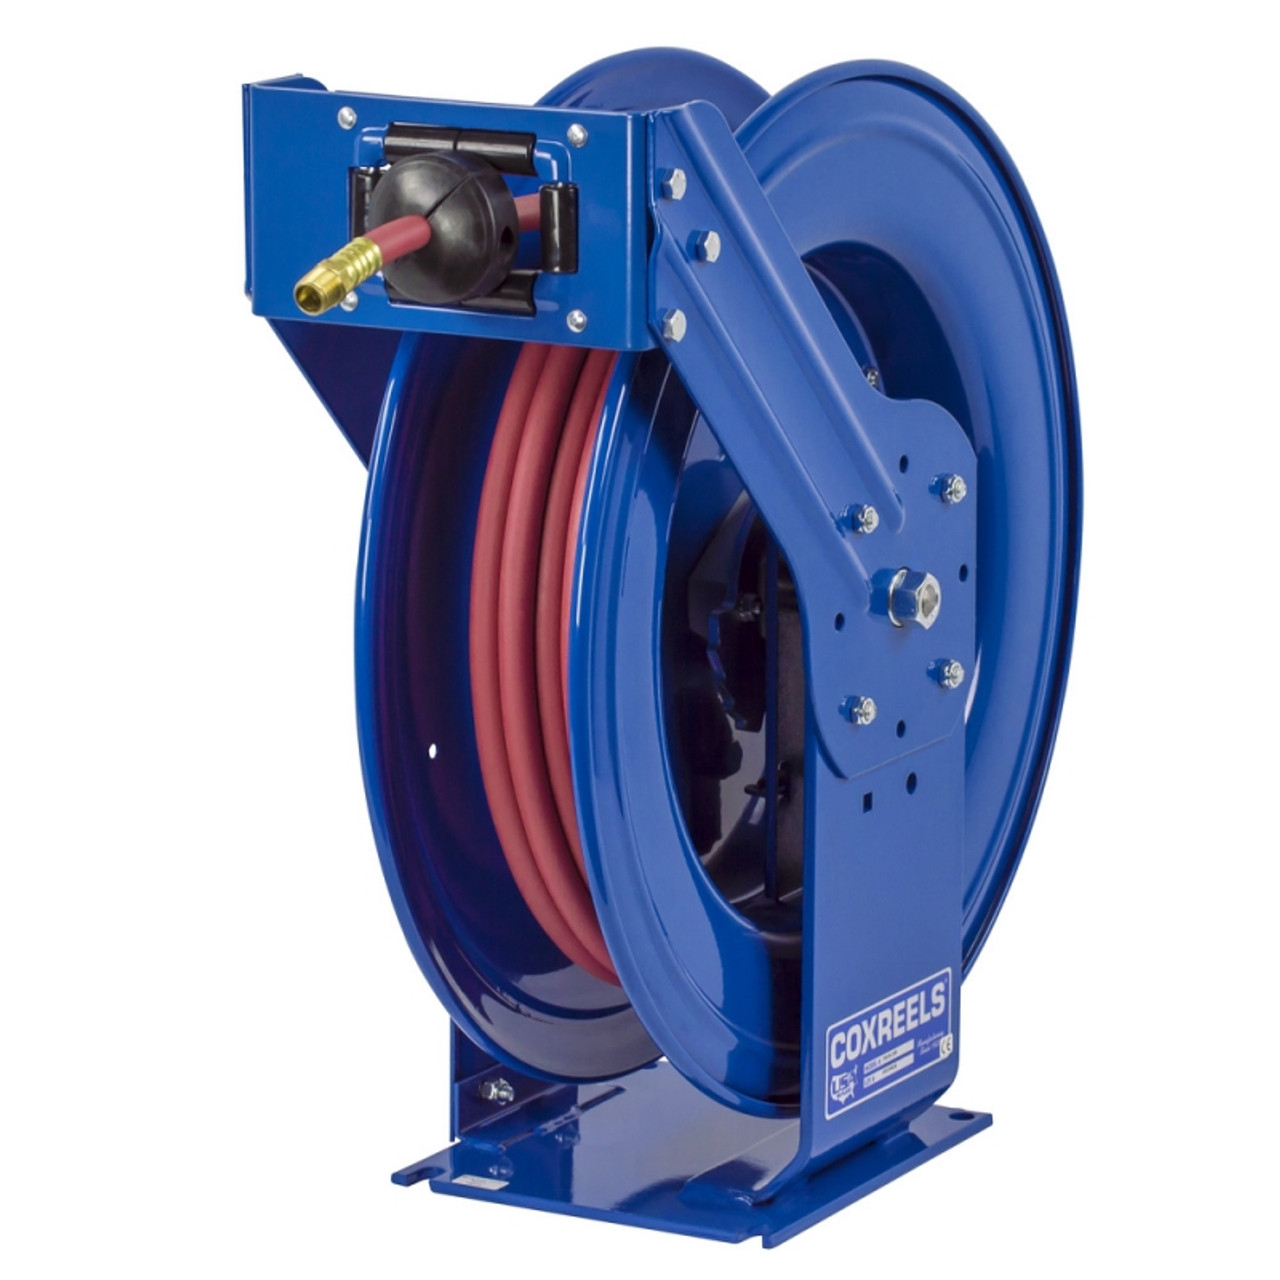 Search top rated retractable air hose reel